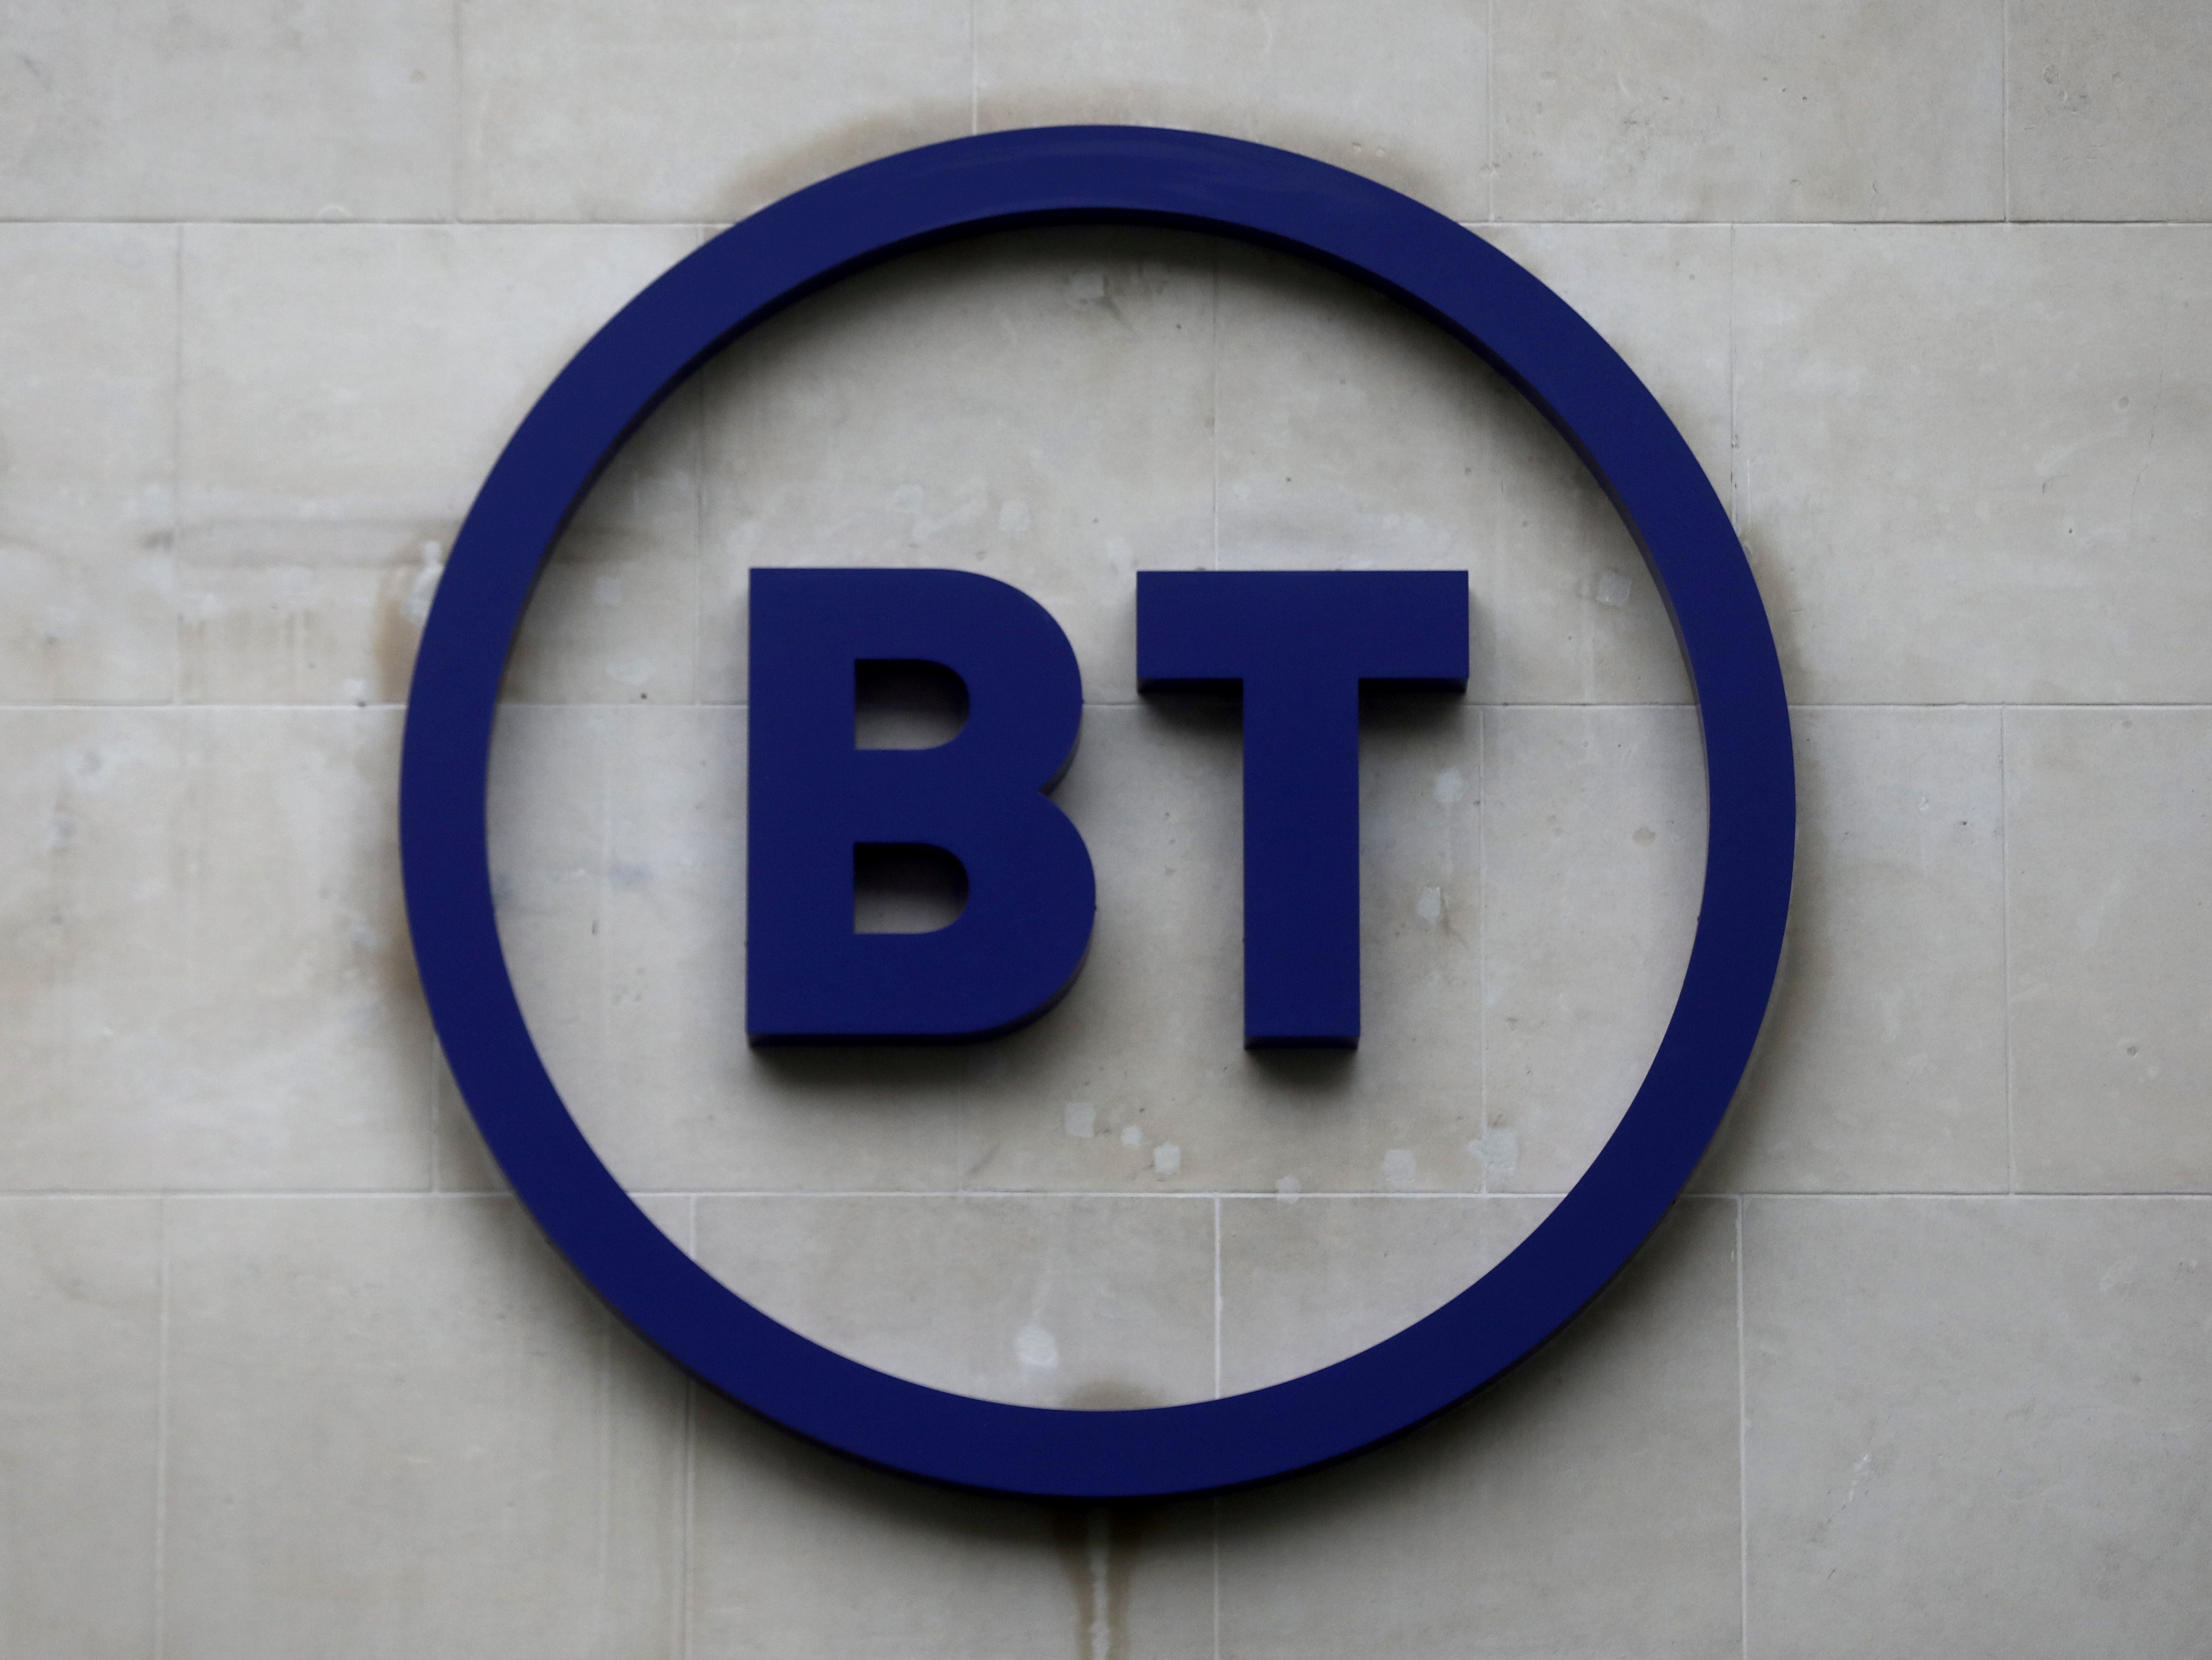 BT gave its 100,000 workers shares worth £500 last summer